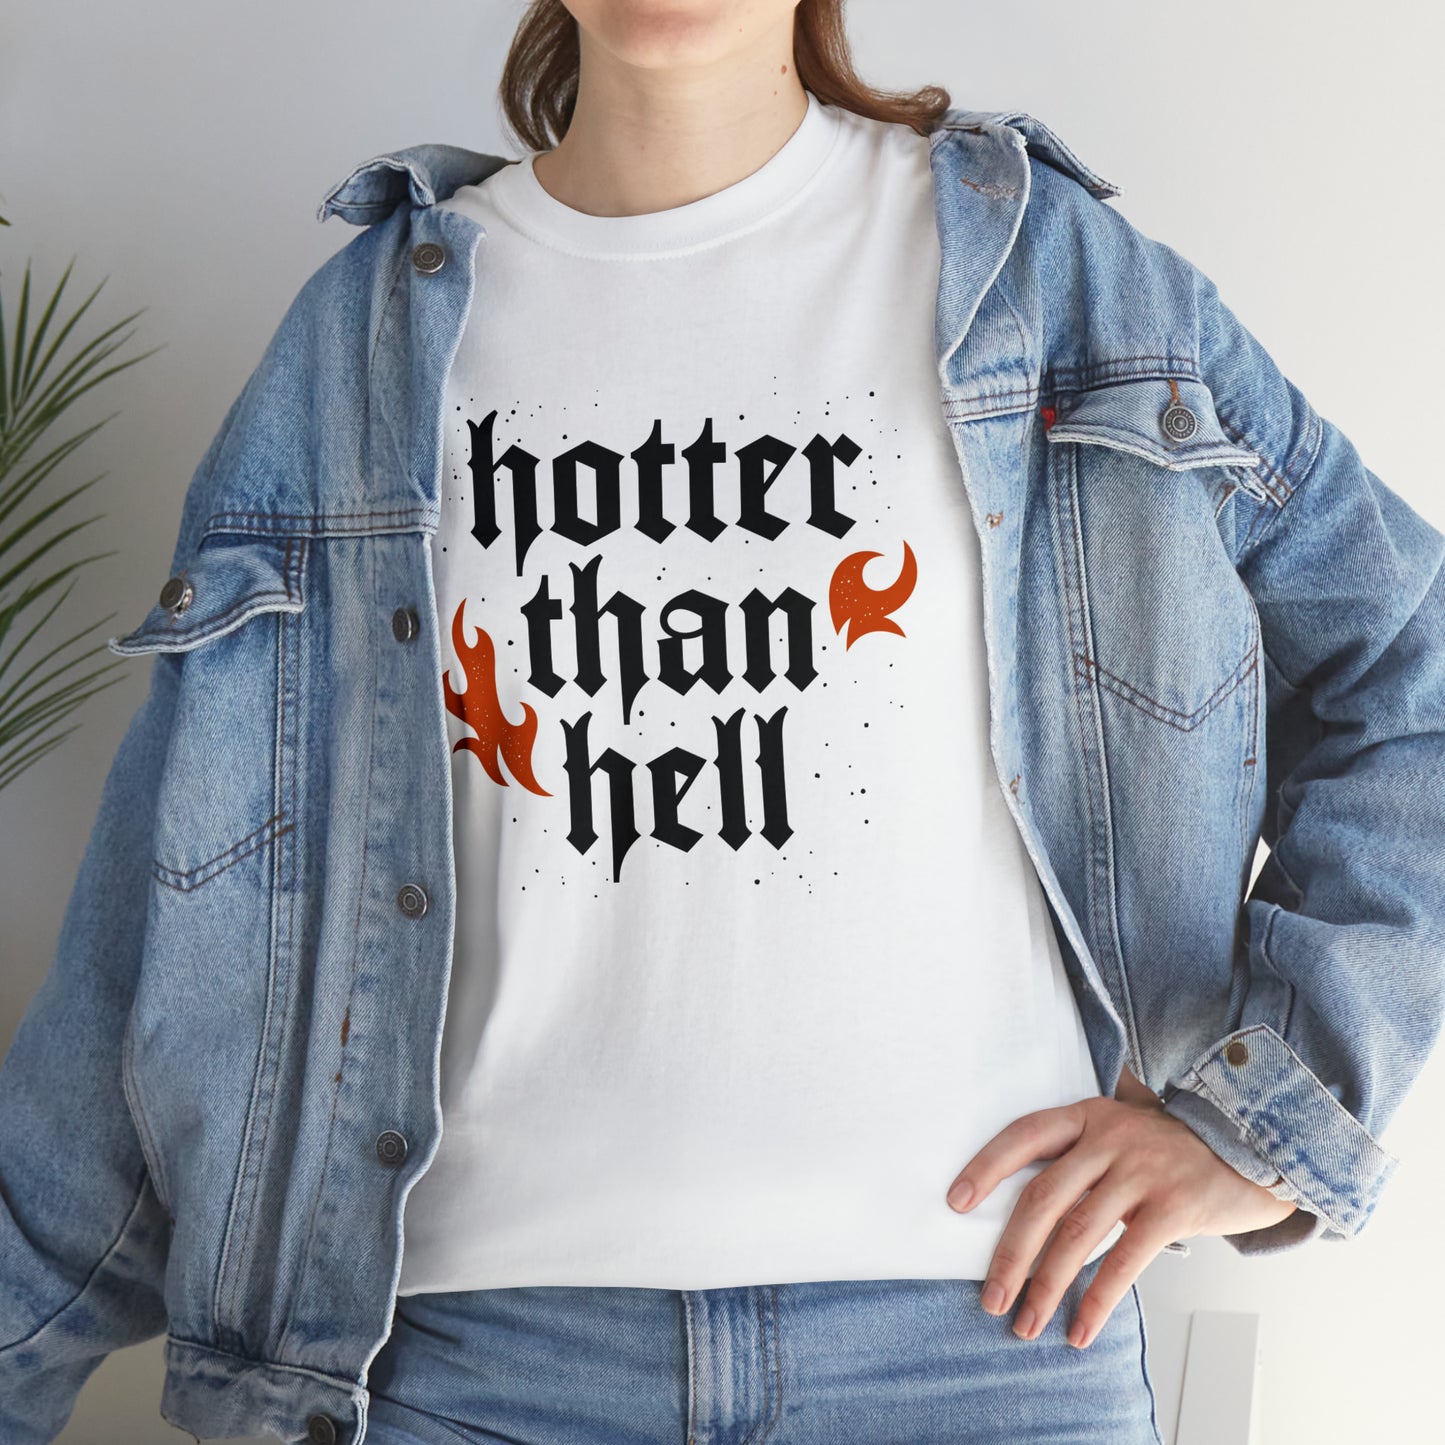 Hotter than hell- Unisex Heavy Cotton Tee